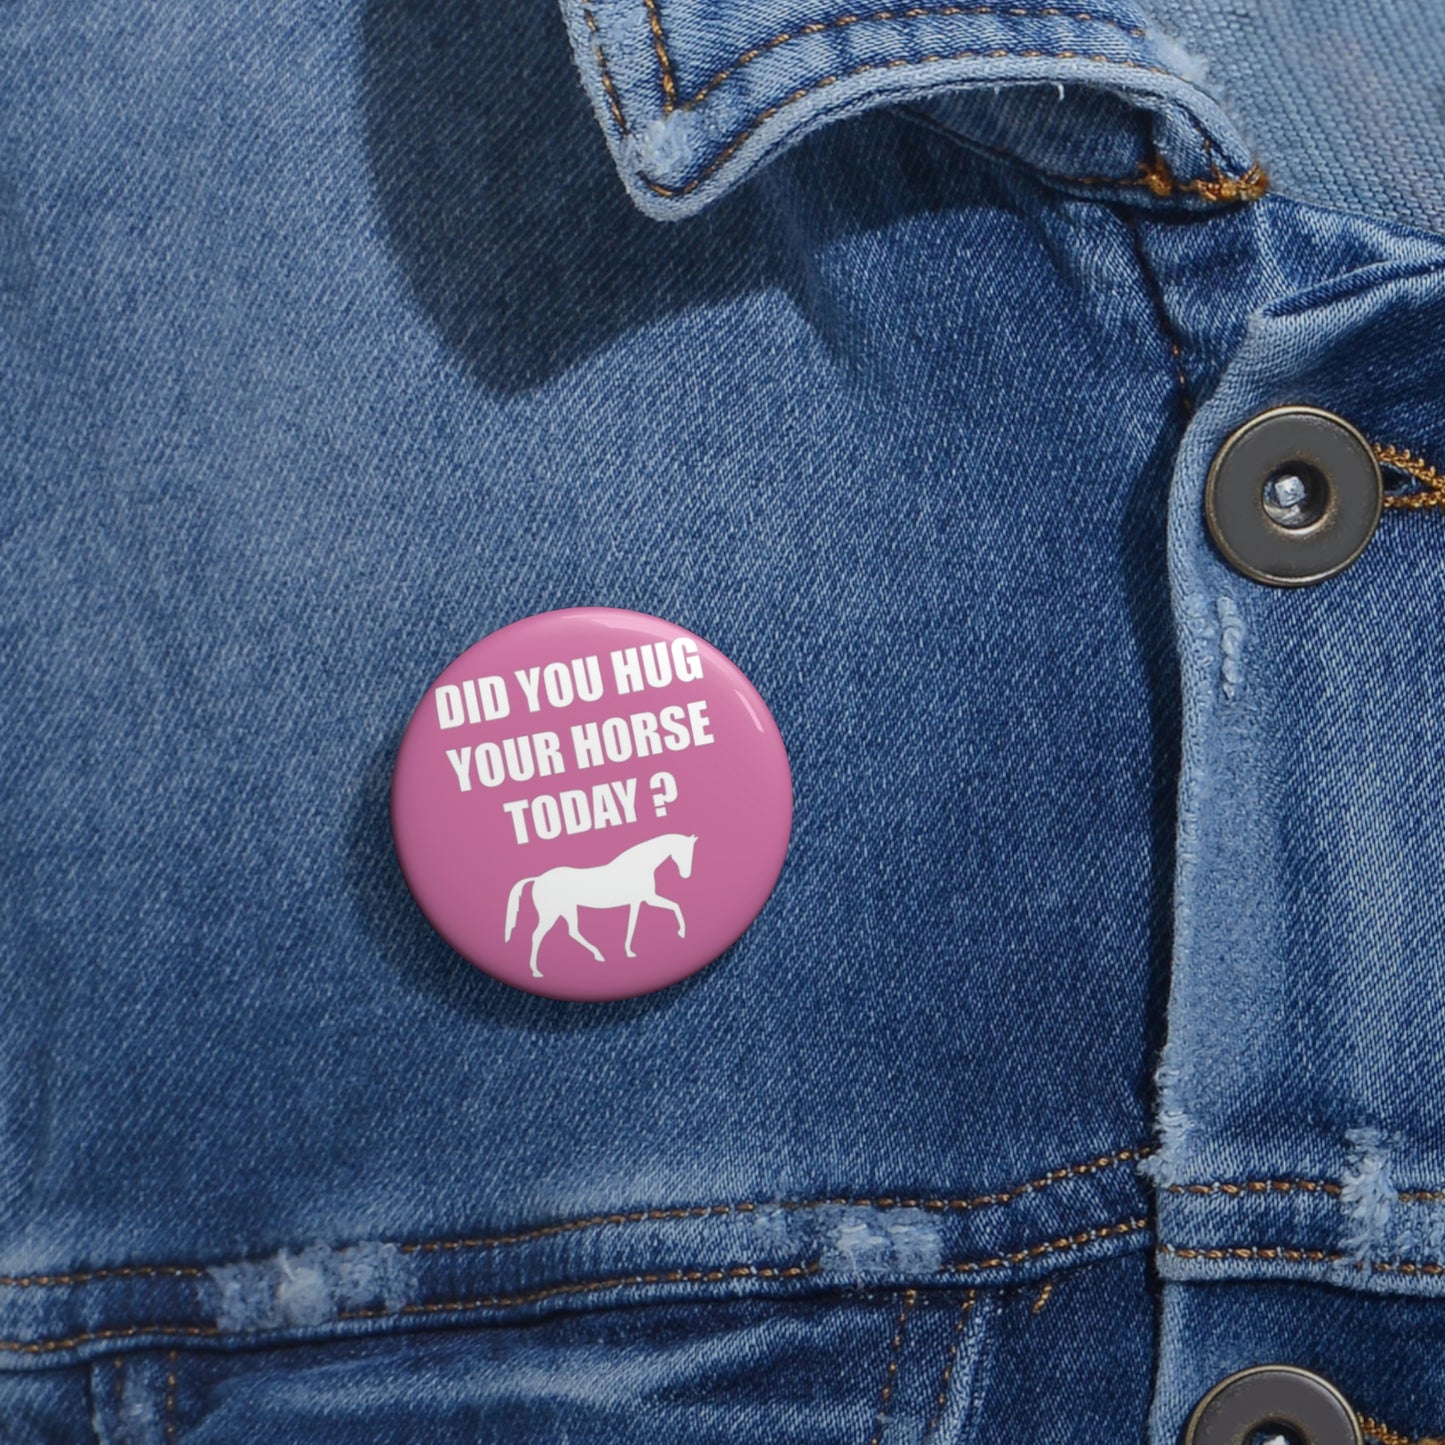 Horse Hugs - Custom Pin Buttons - Pink / White